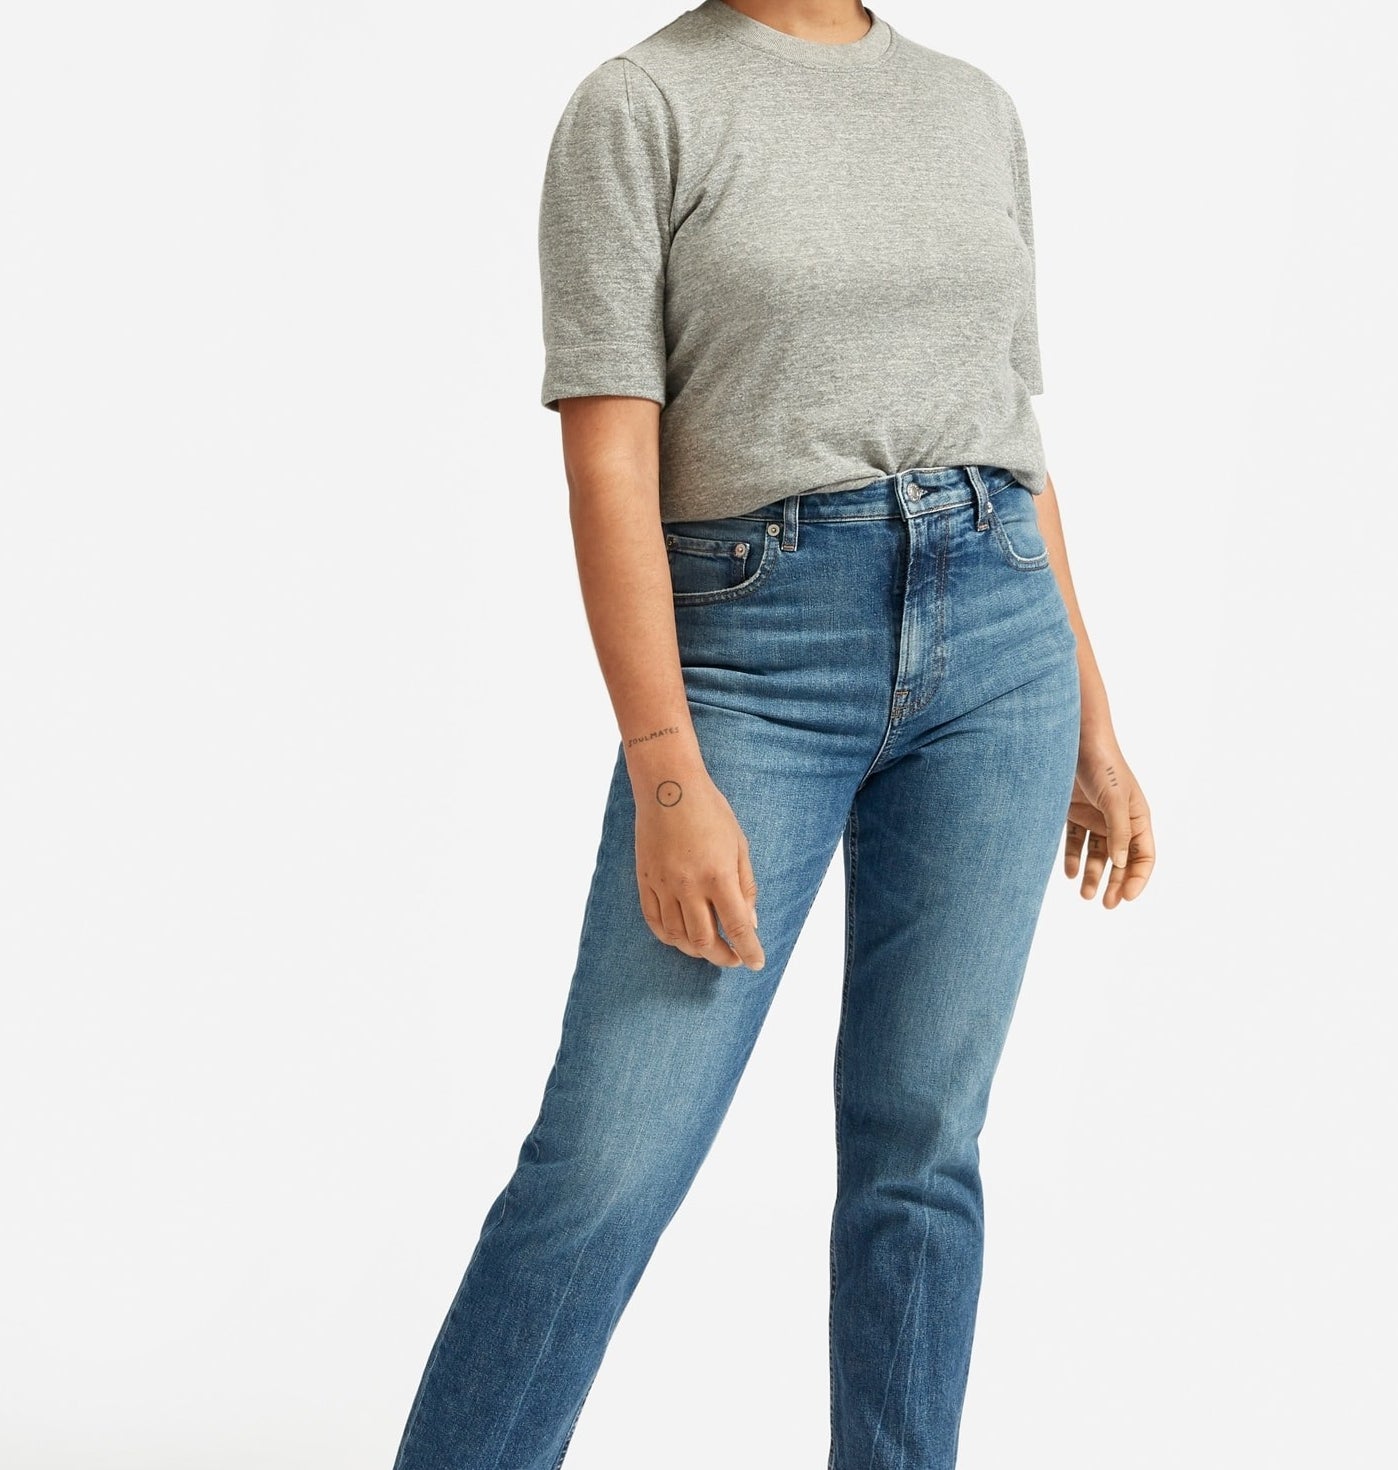 There's A Big Sale Right Now At Everlane, So If You Need To Stock Up On ...